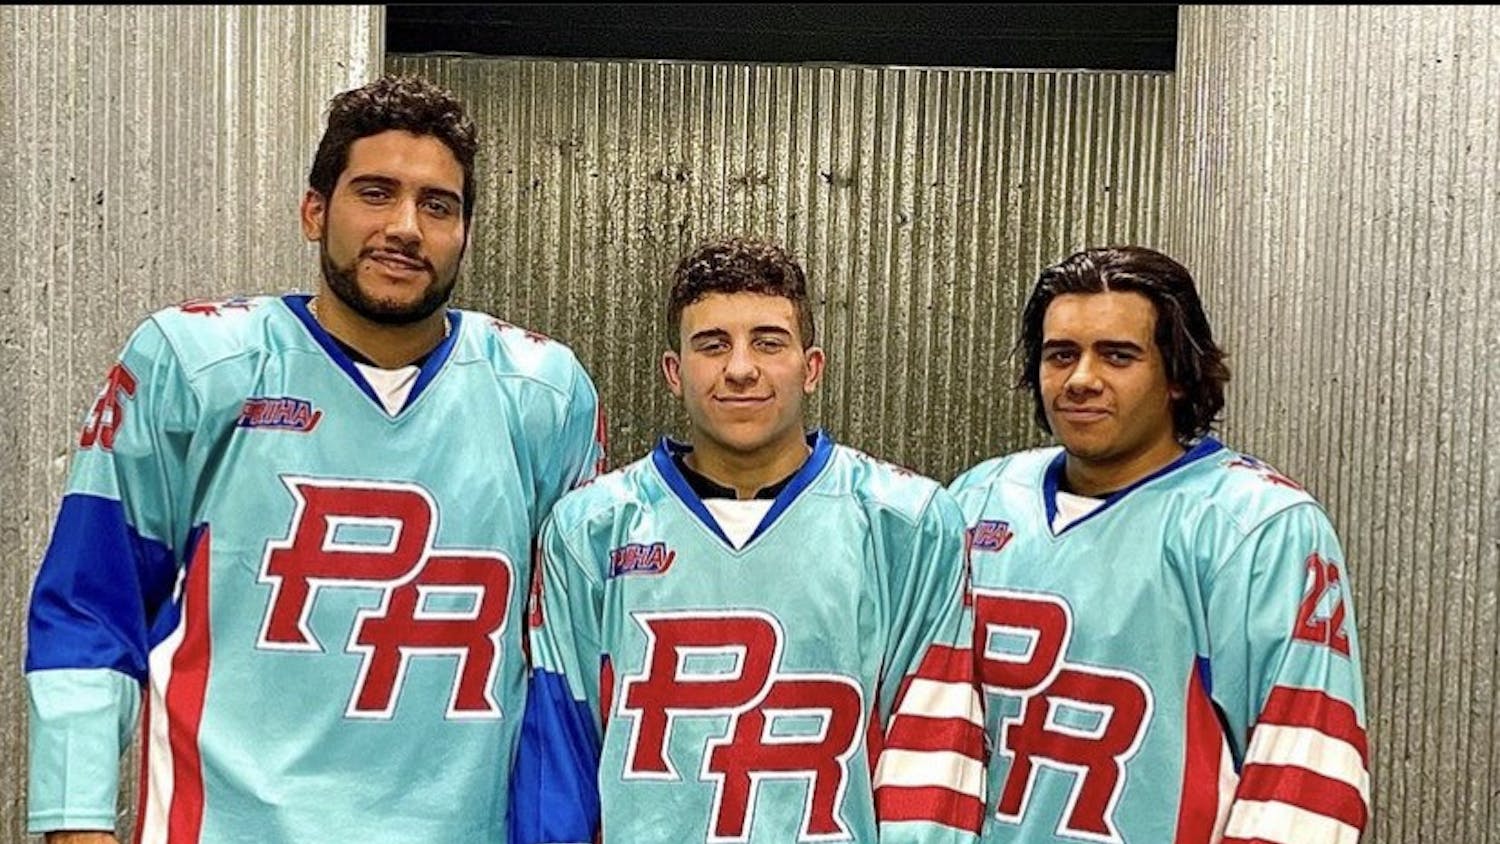 Each of the Vargas brothers scored while representing Puerto Rico in Division II of the 2022 LATAM Cup in September. Left to right: Antonio Vargas, Daniel Vargas, Hector Vargas.